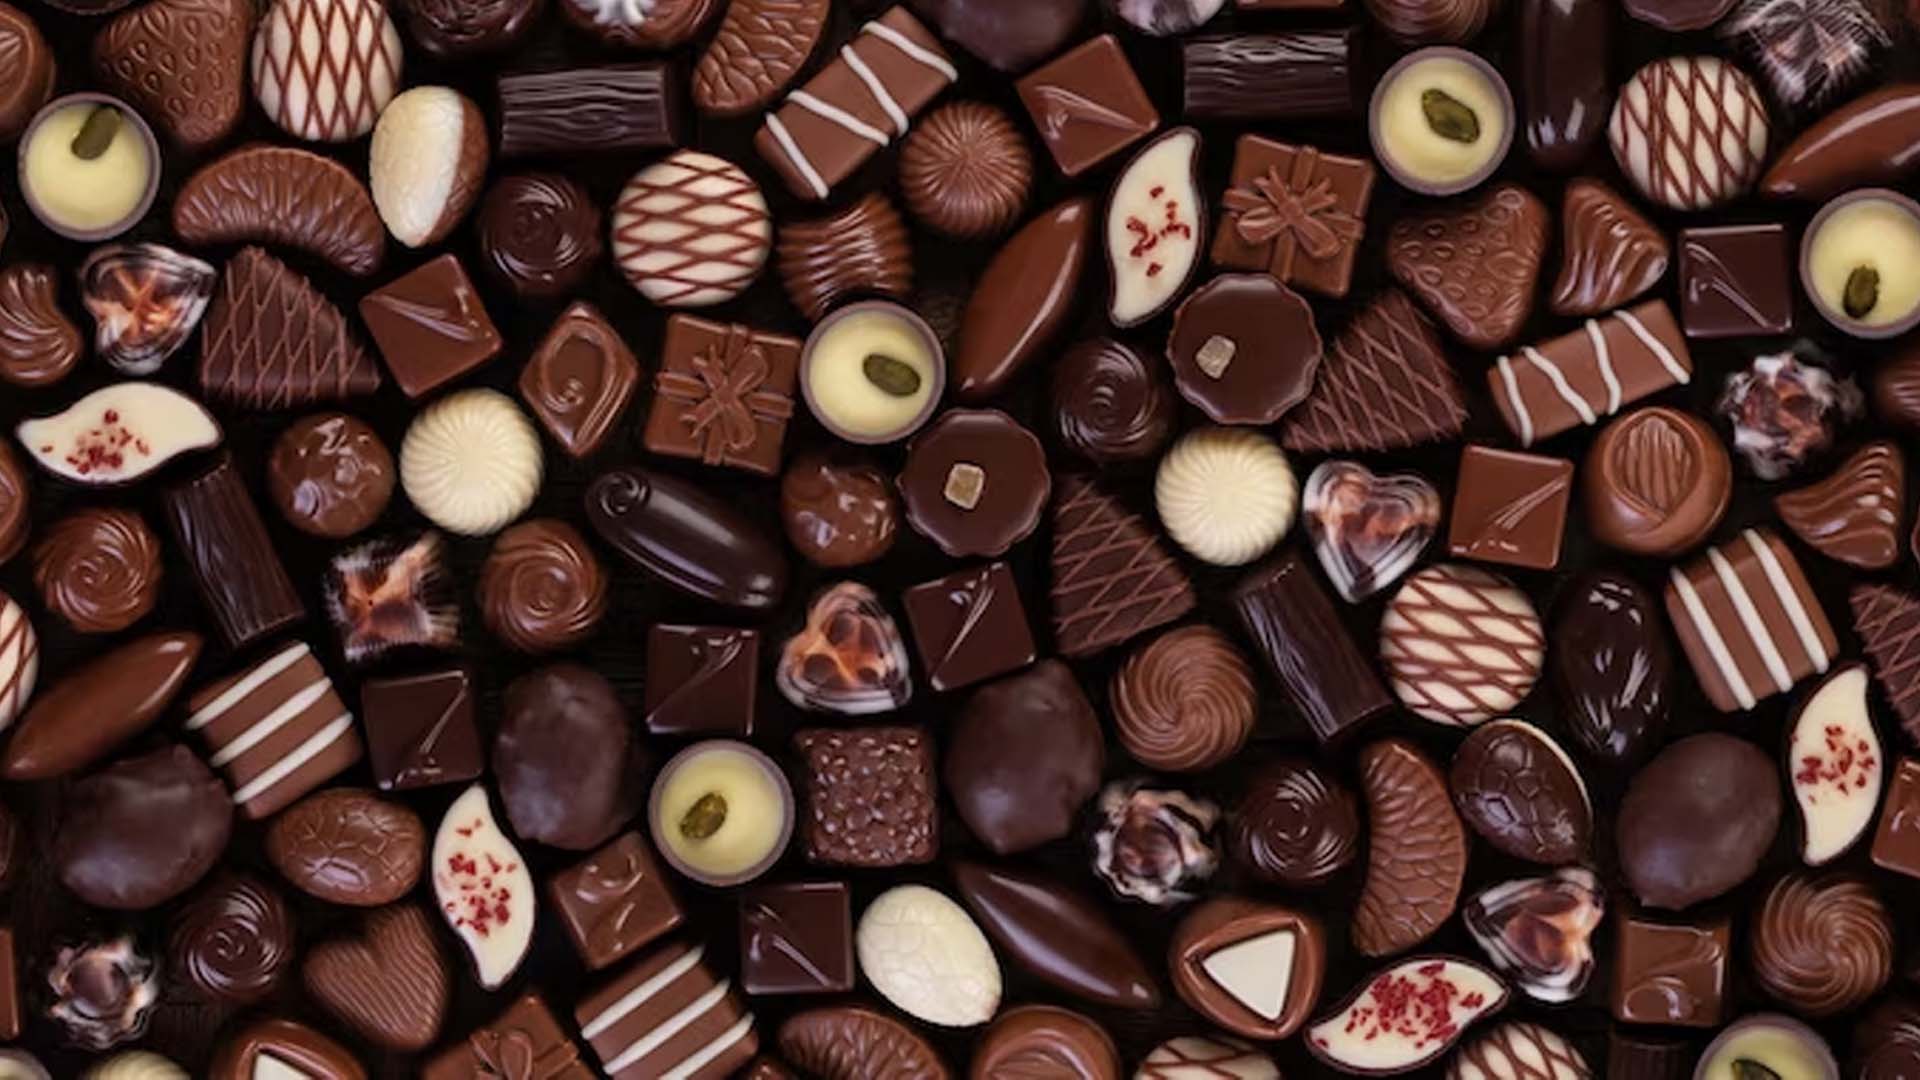 What Type of Chocolate Has Health Benefits?